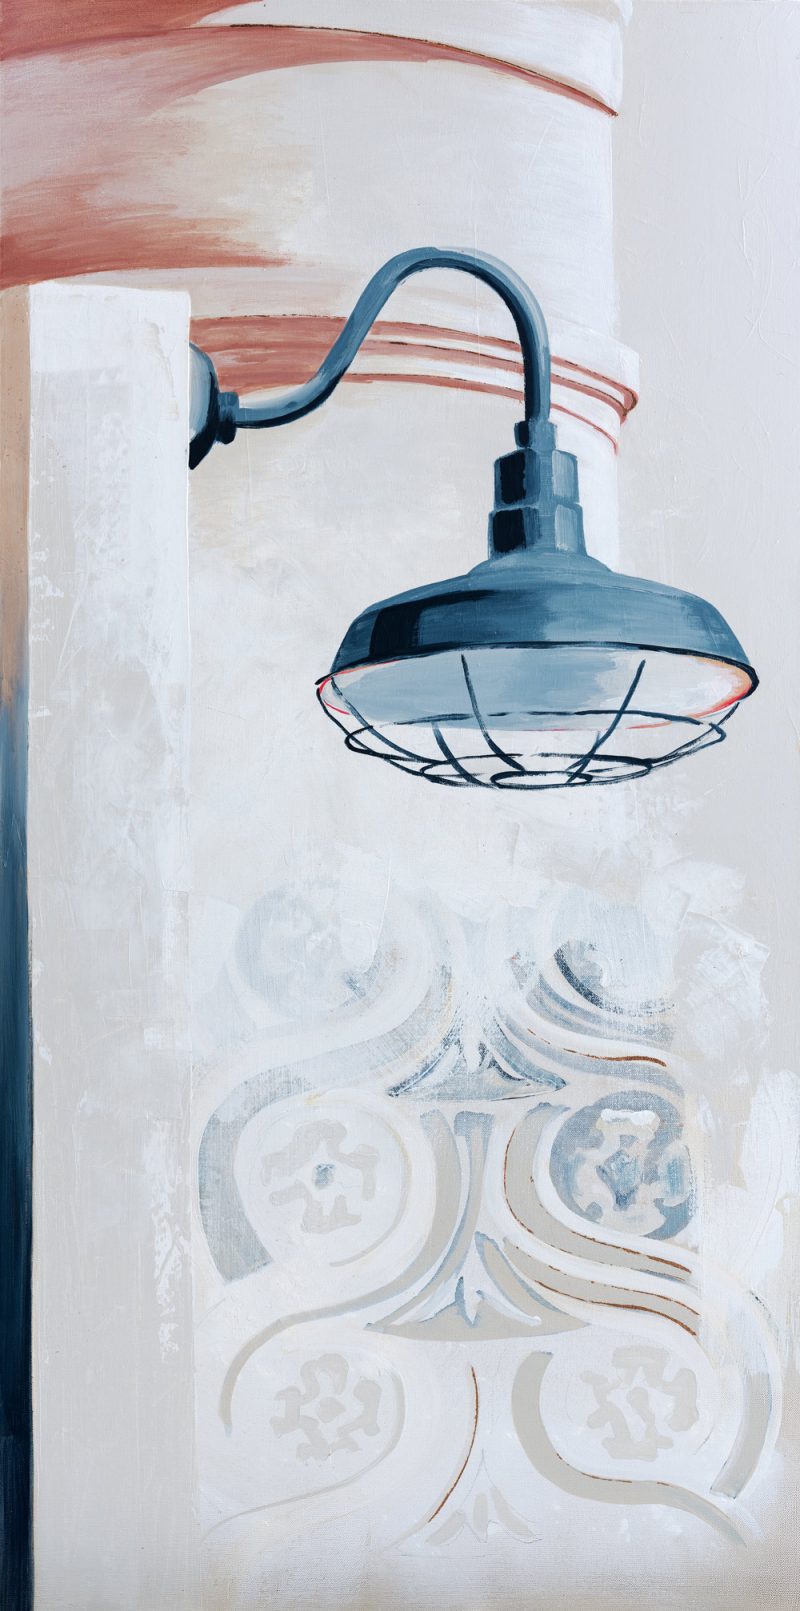 “Just Right Here,” by Teale Hatheway is an industrial street light painting in cream, blue and soft rust colors.